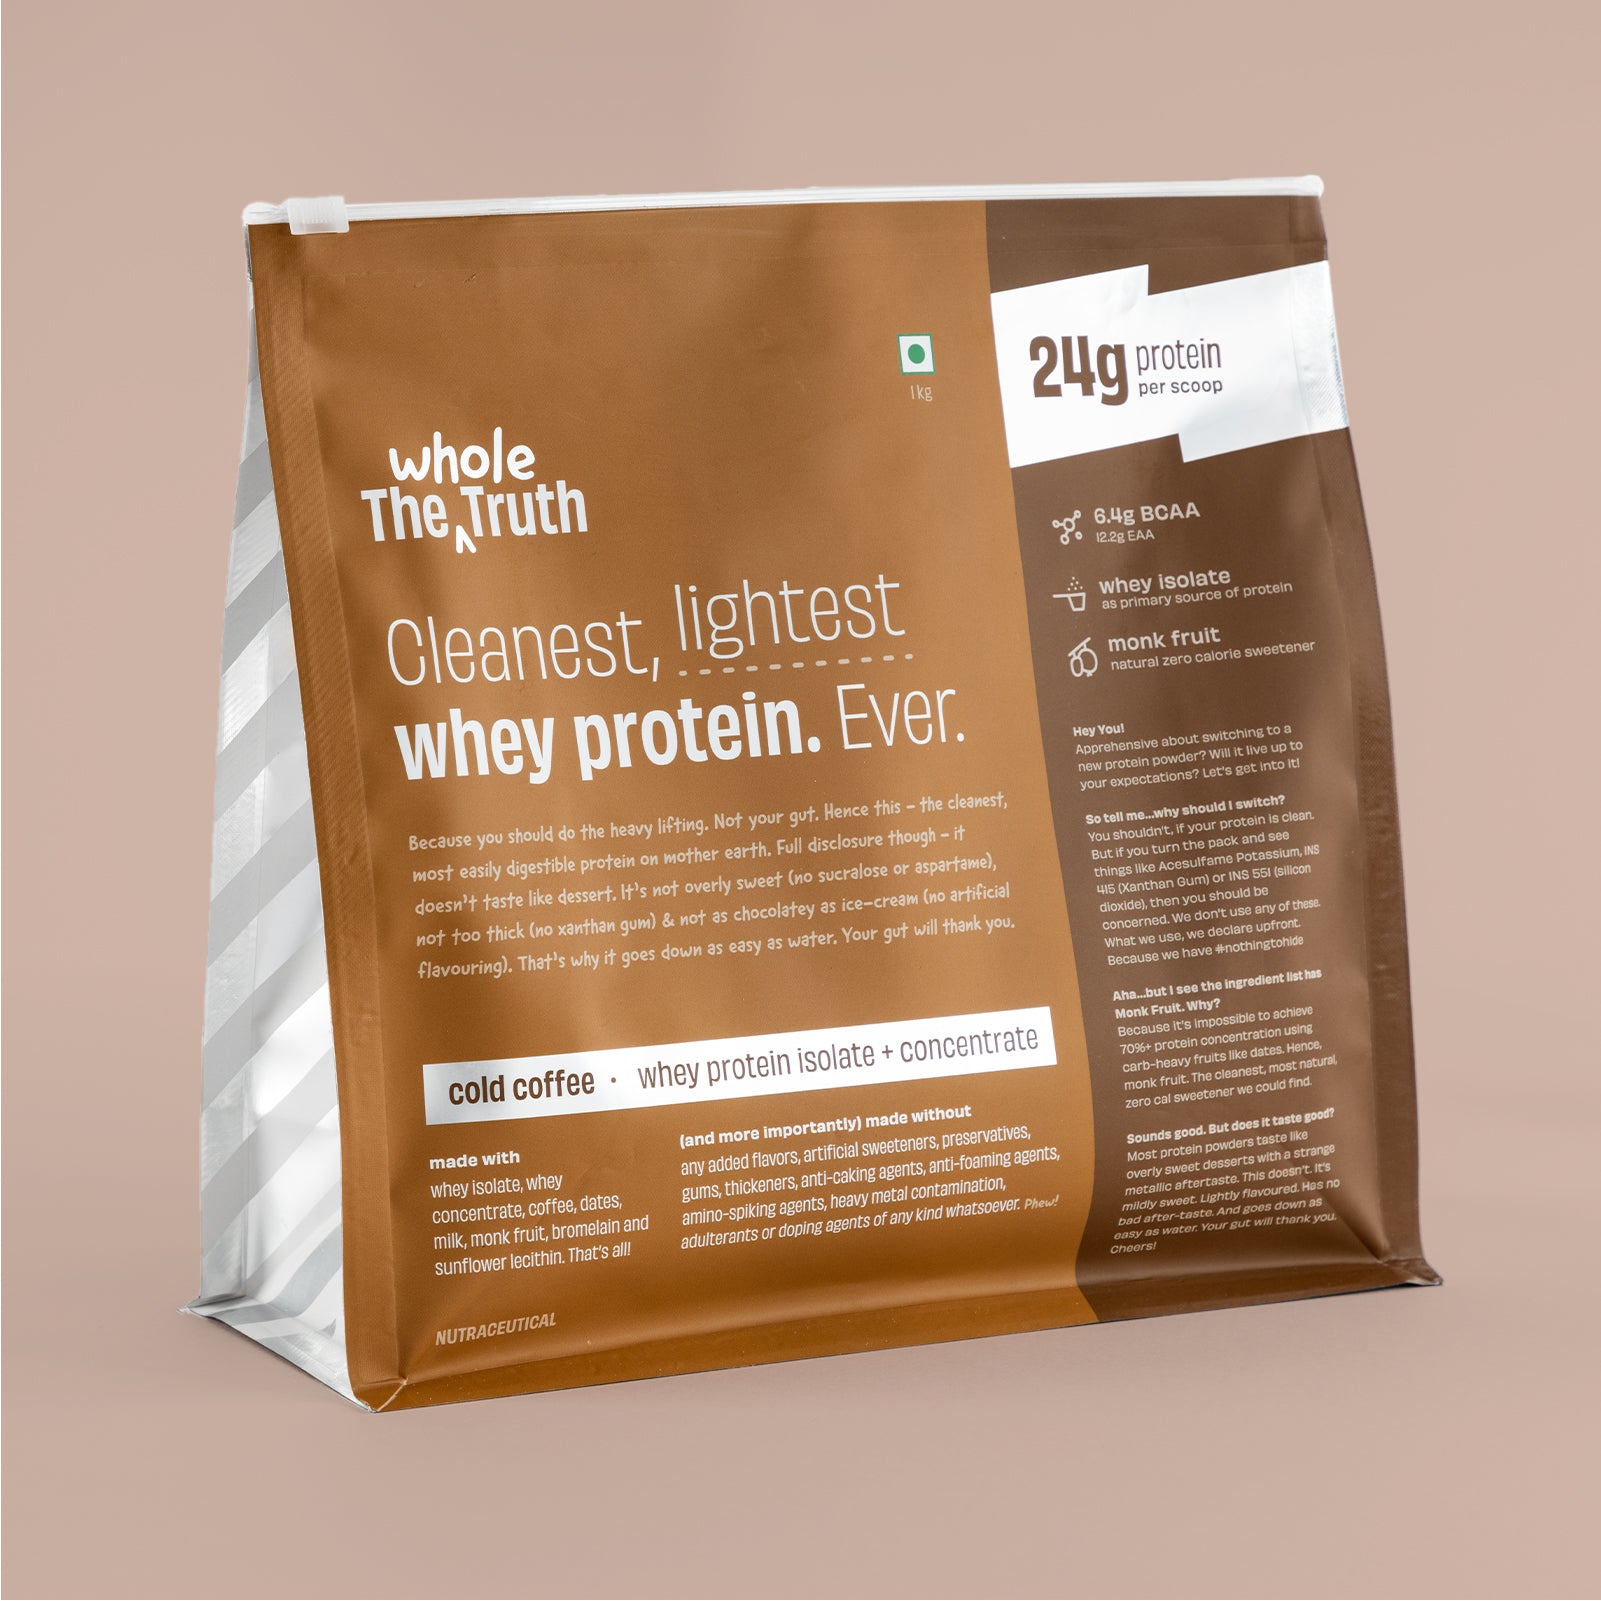 The Whole Truth - Cold Coffee - Whey Protein Isolate + Concentrate 1 kg